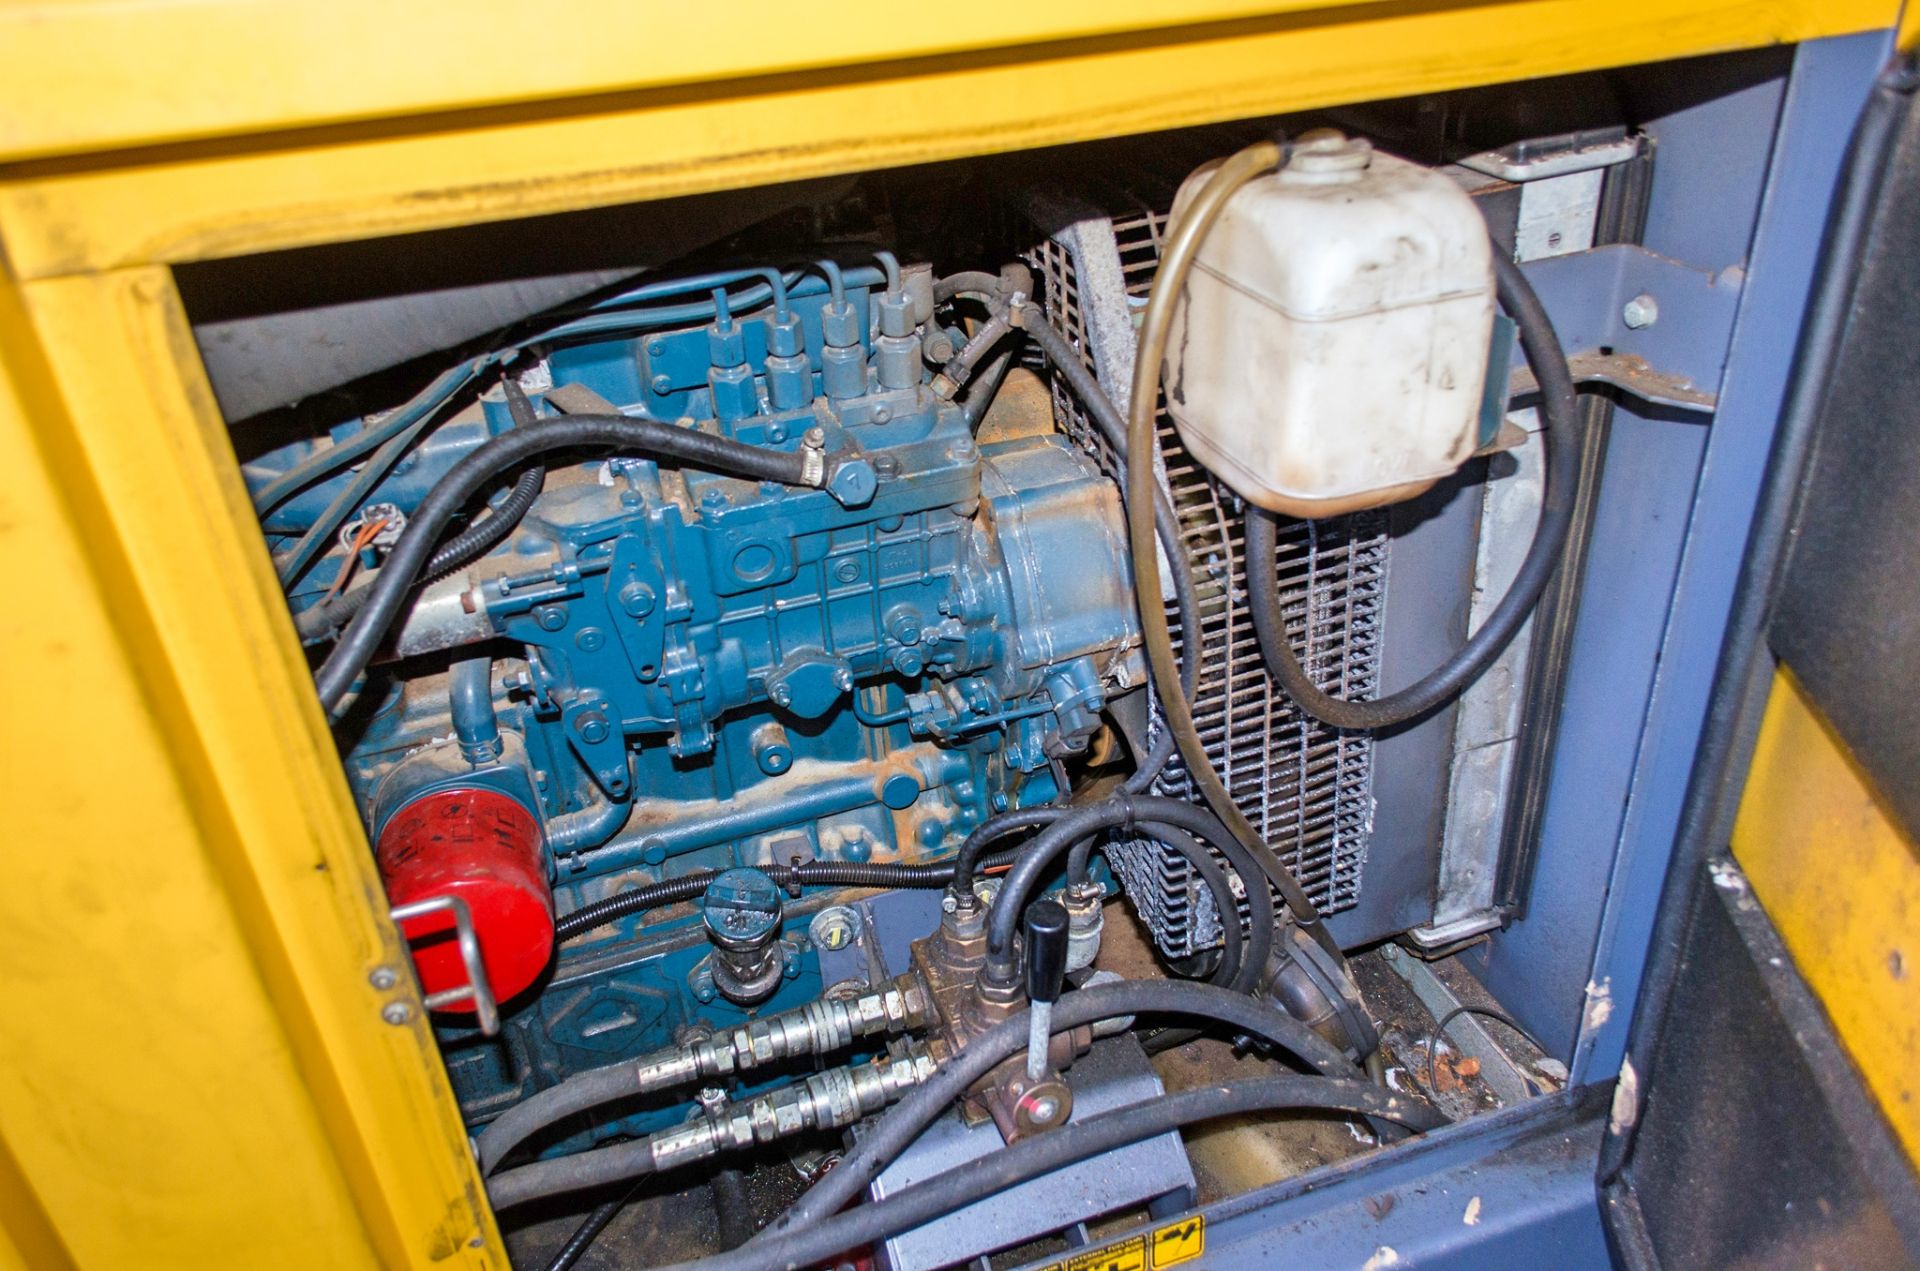 10ft x 8 ft steel power cell c/w Atlas Copco QAS40 diesel driven generator (Recorded Hours: 18,123), - Image 10 of 10